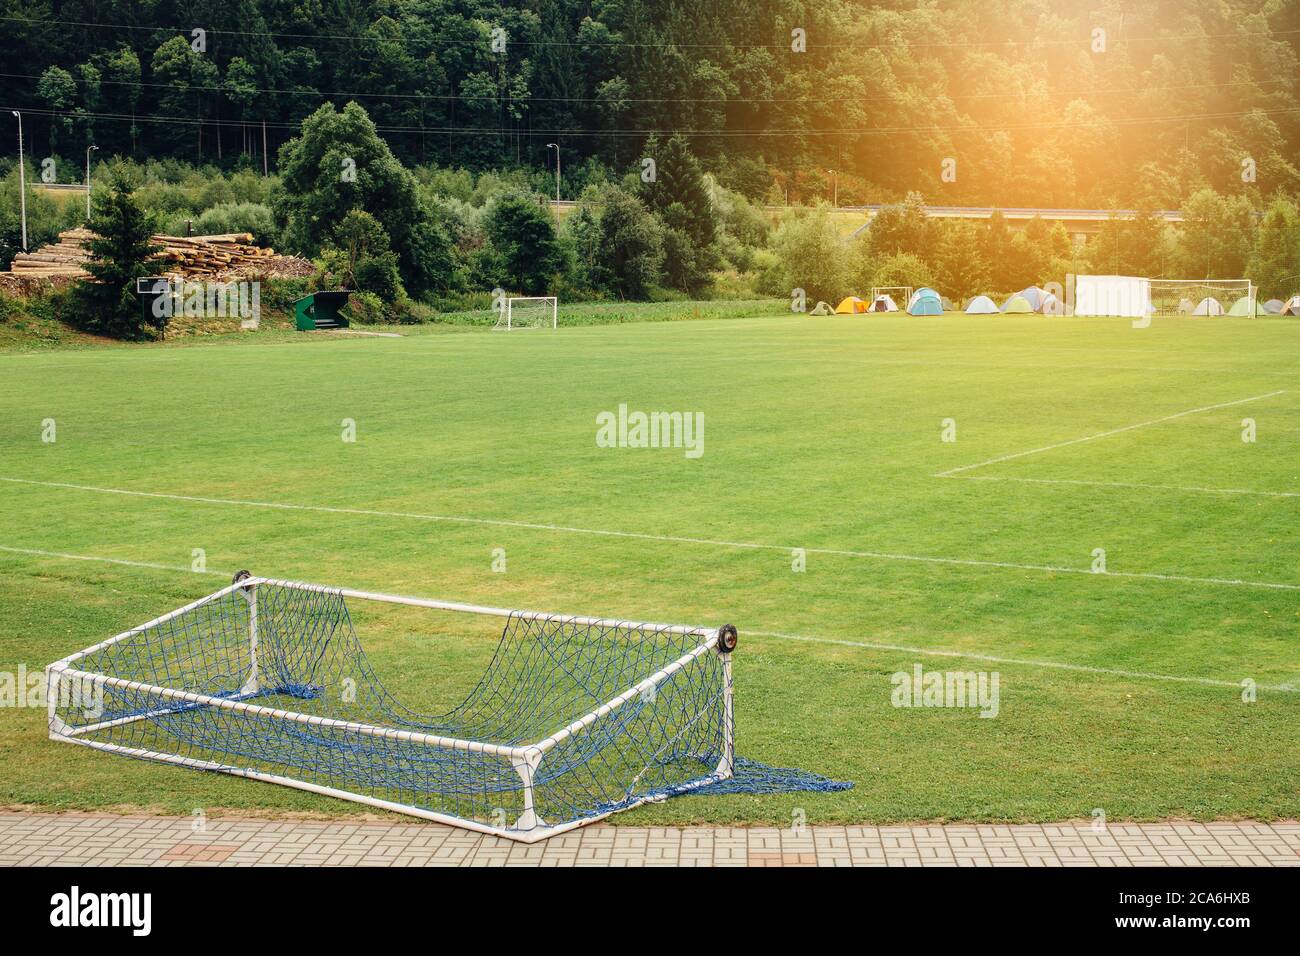 Fallen soccer football gate lying on empty green field with camping tents in the background Stock Photo